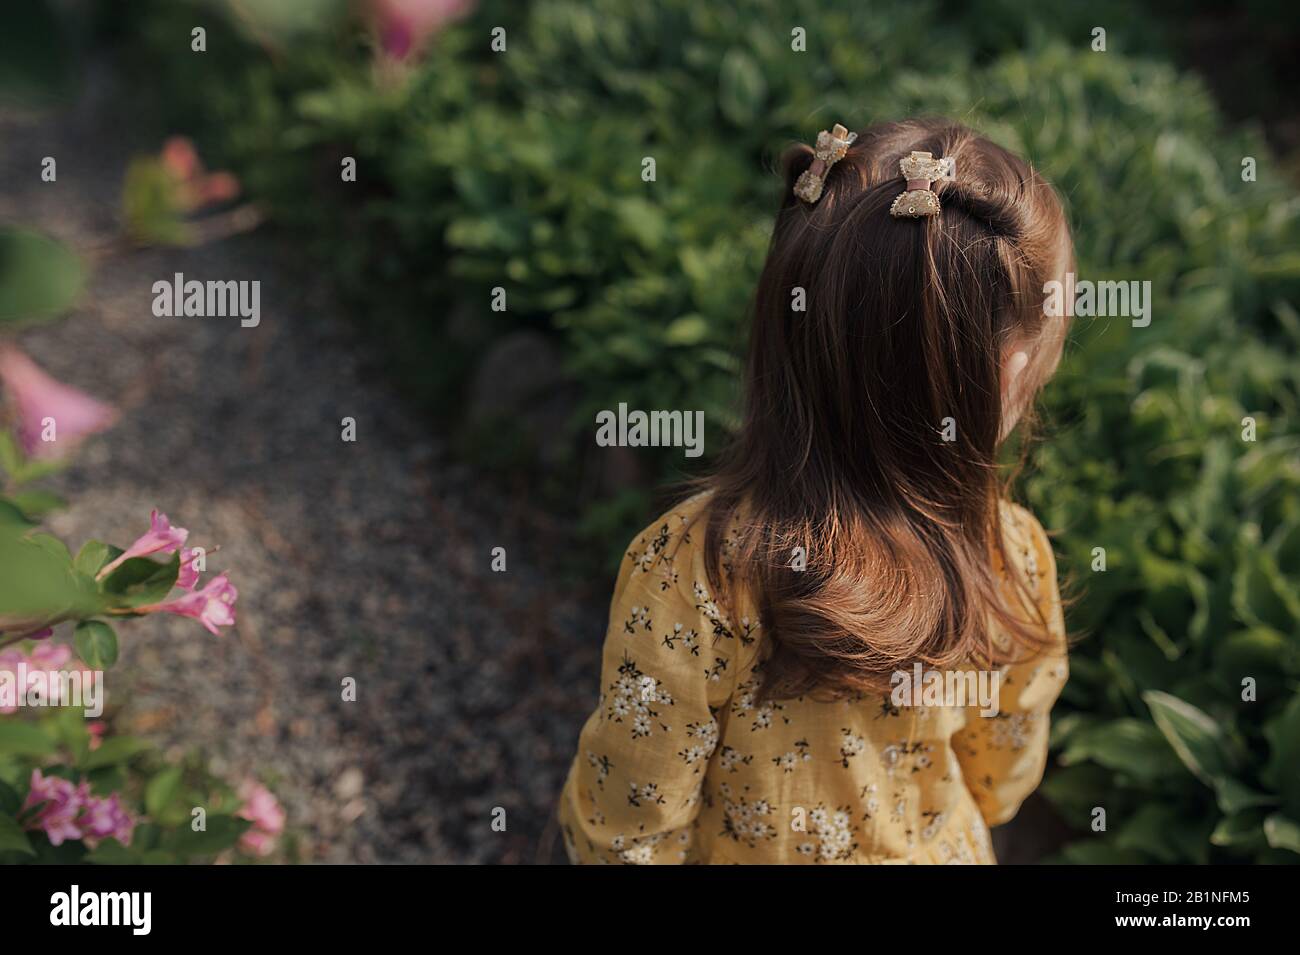 a gentle girl with long curly hair and a hairstyle with barrettes, in a  yellow dress, walks in a flower garden in the spring rear view Stock Photo  - Alamy